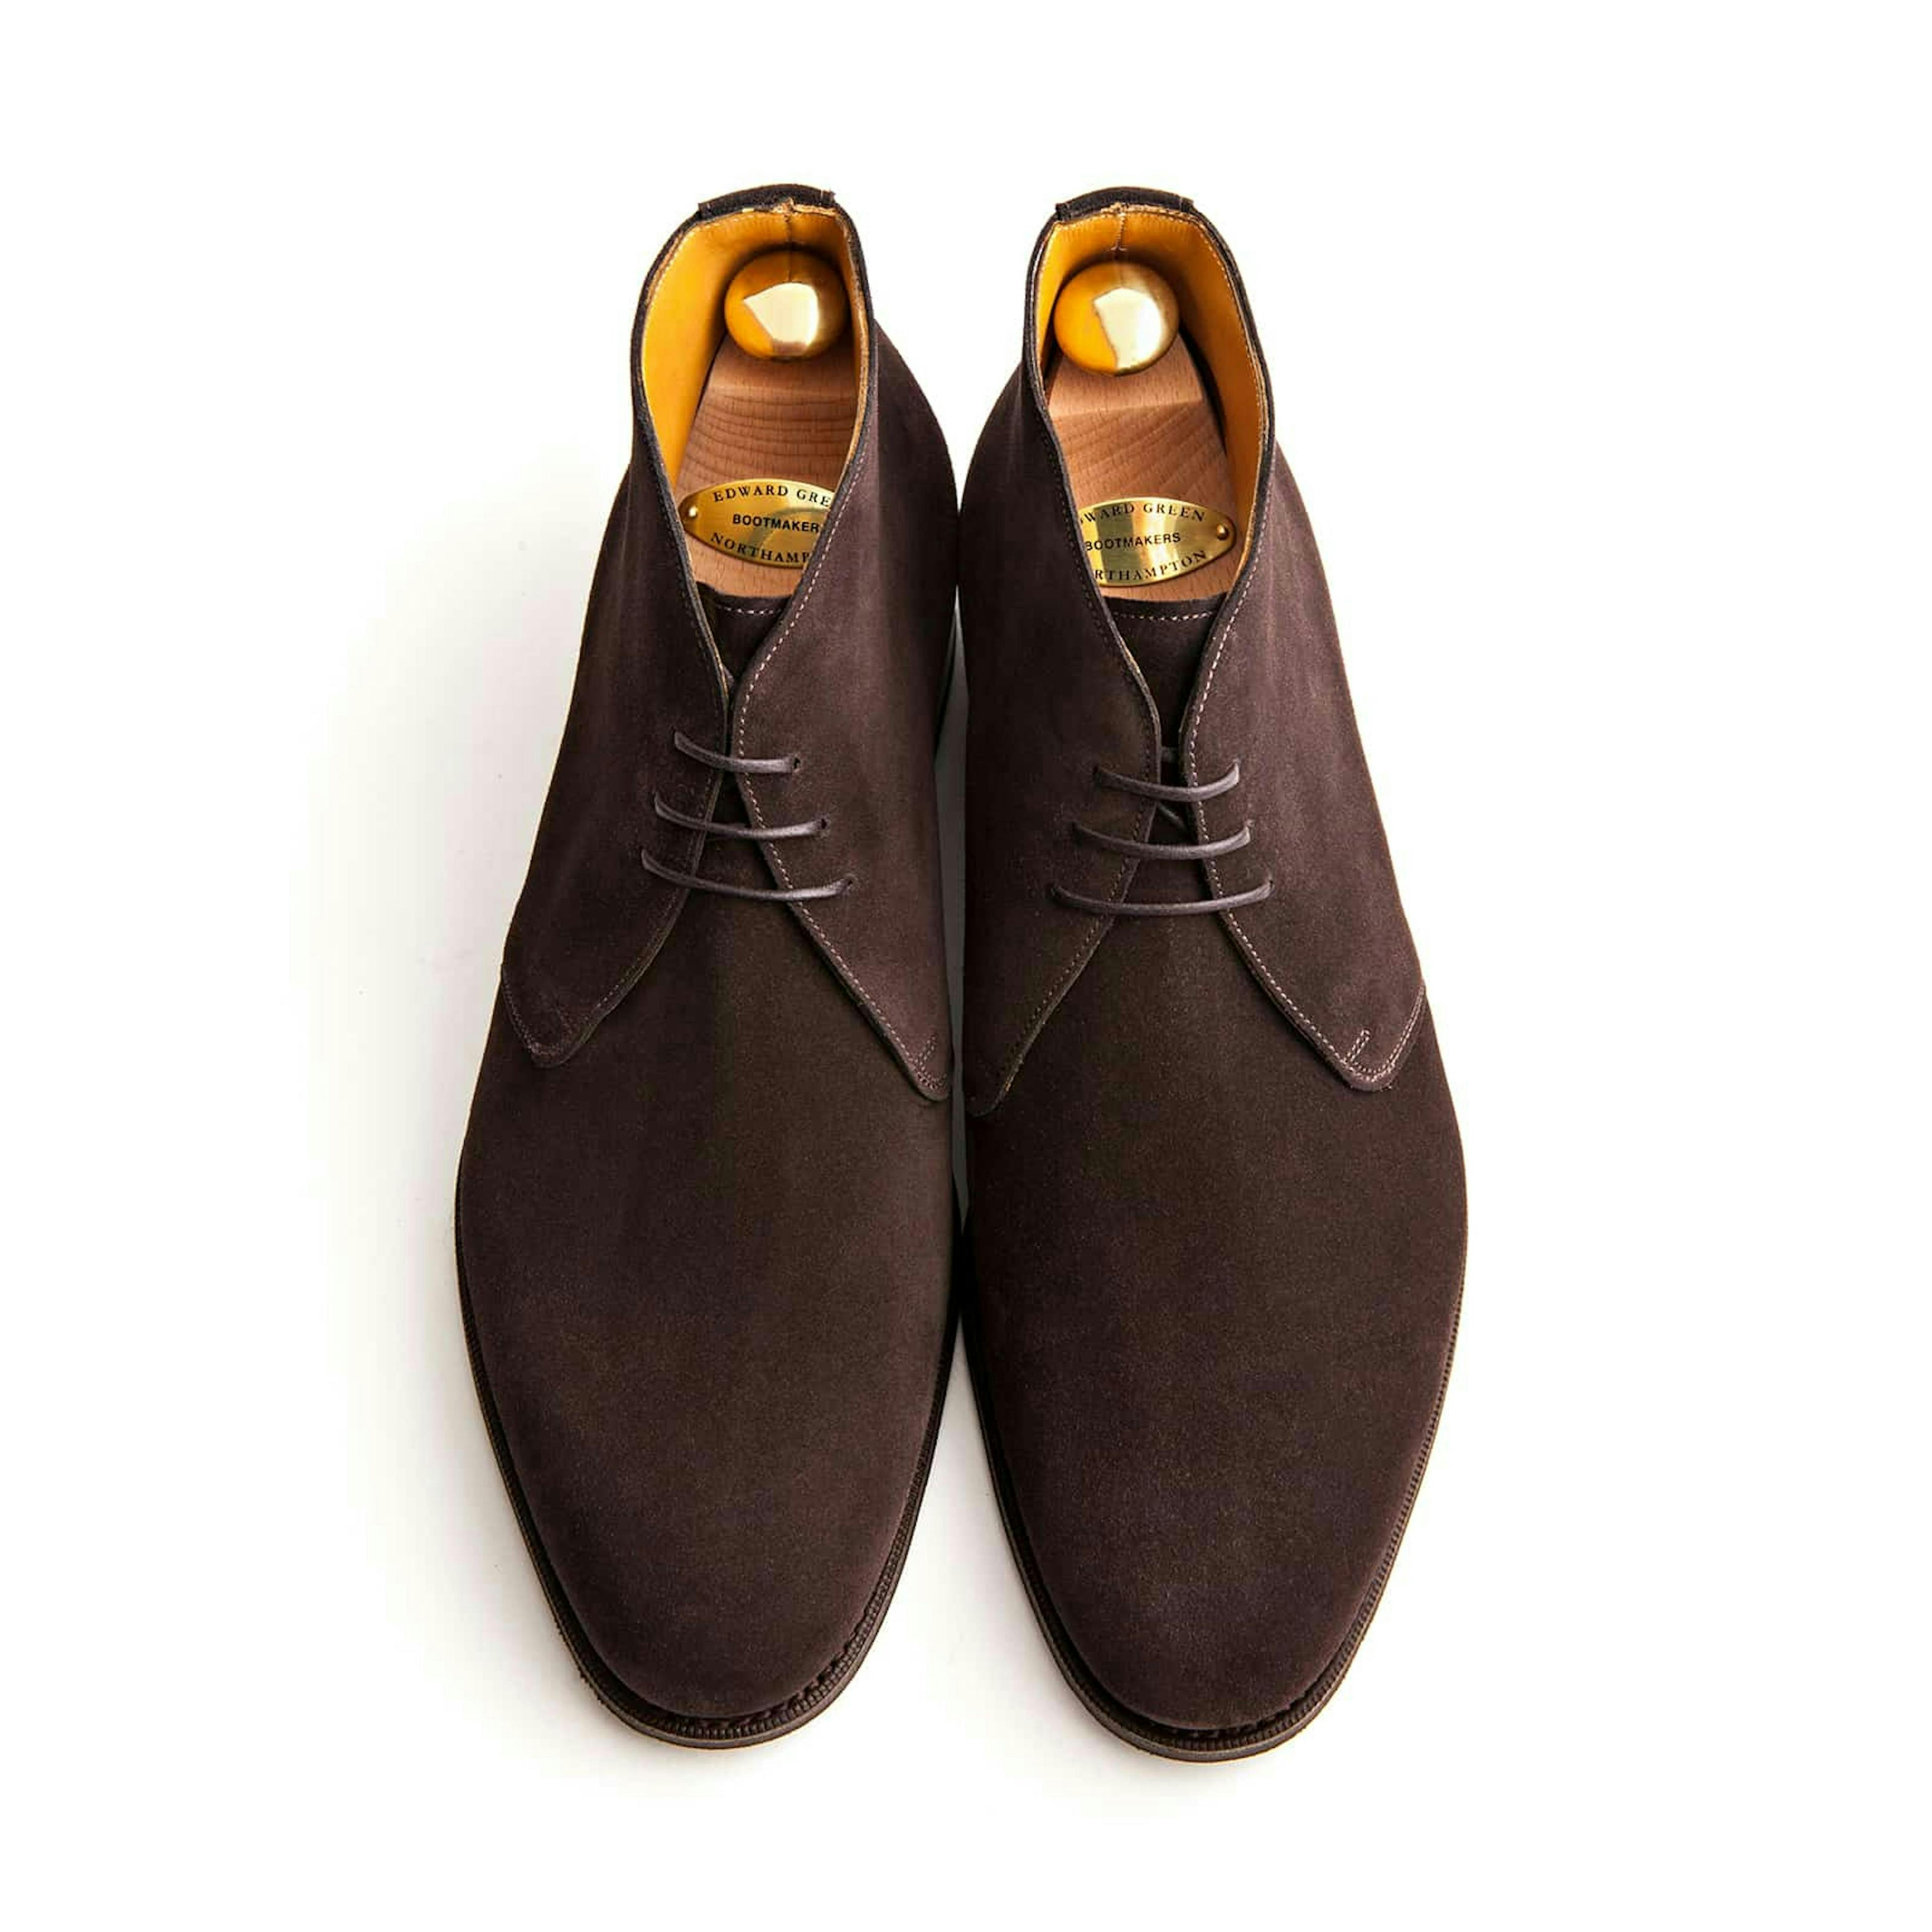 Top view of an Edward Green Banbury in Espresso Suede.